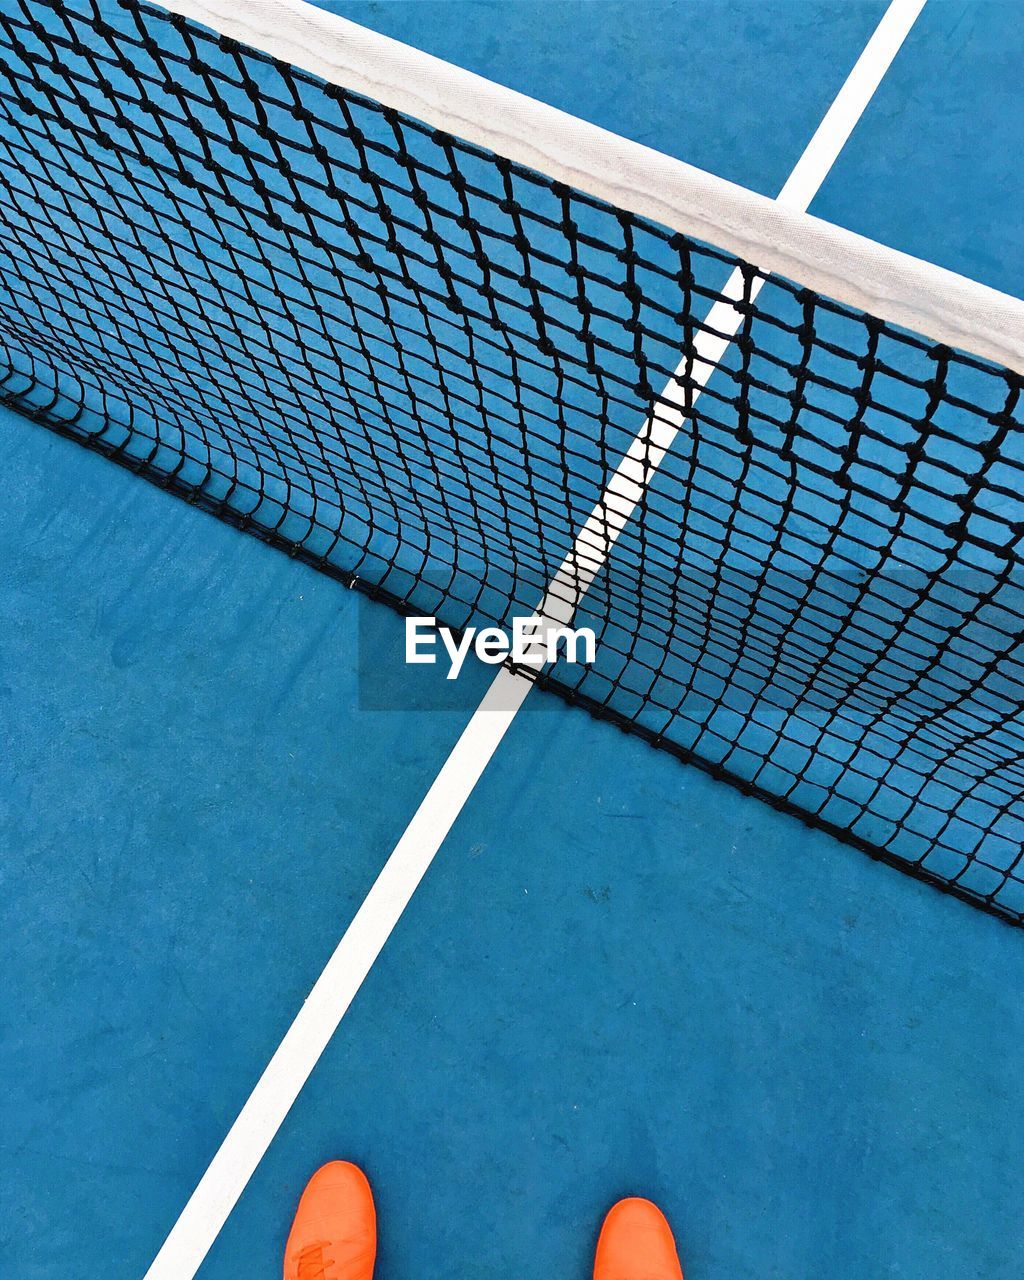 Low section of person standing on tennis court